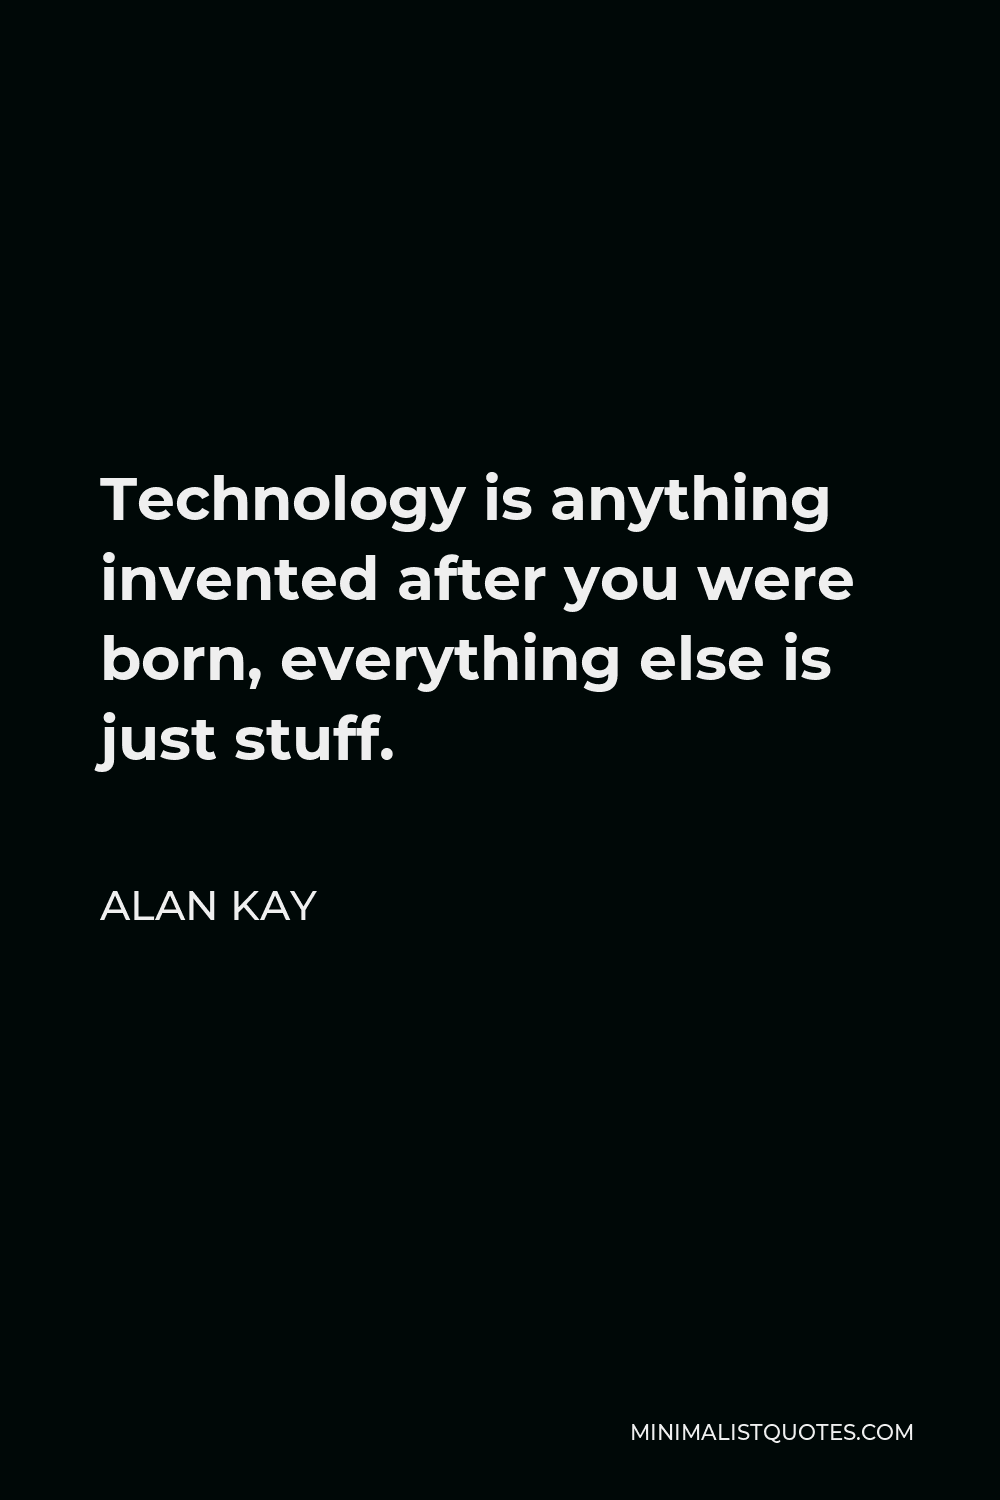 Alan Kay Quote - Technology is anything invented after you were born, everything else is just stuff.